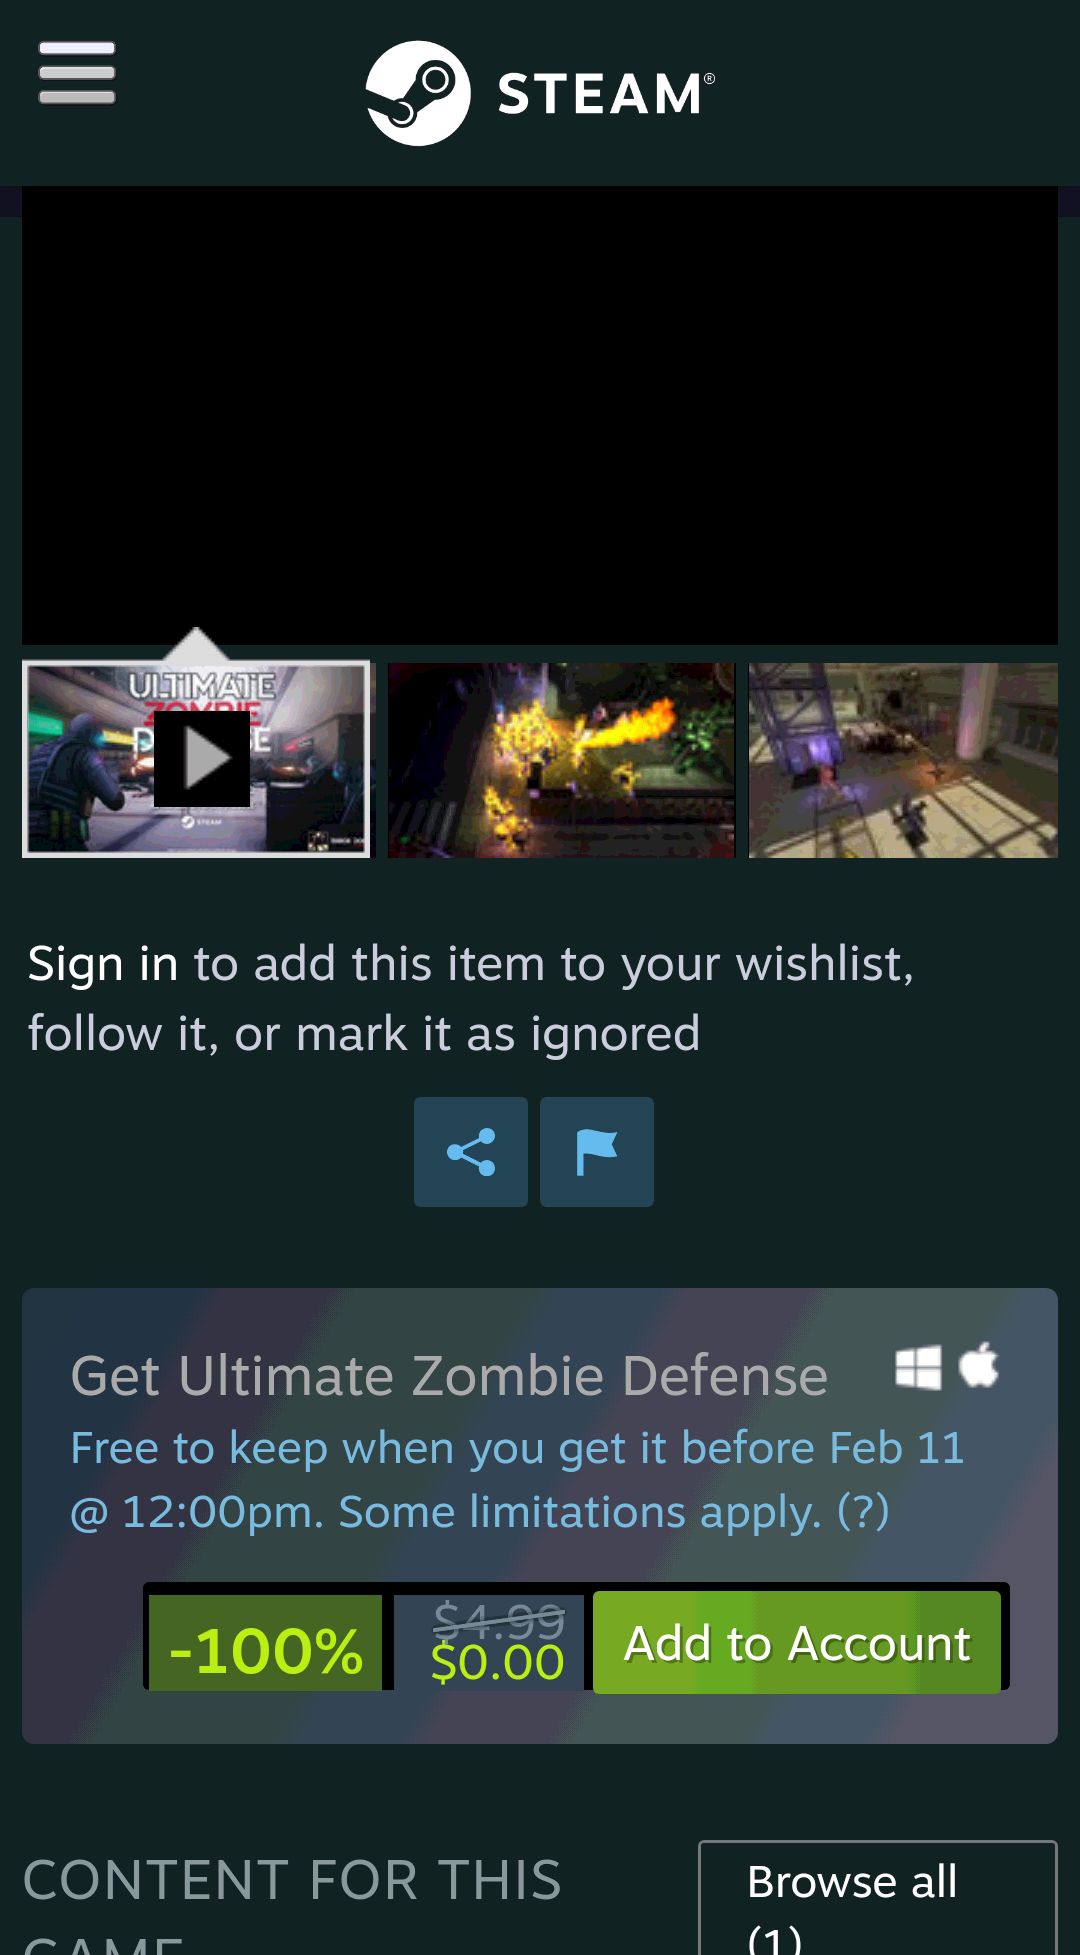 Save 100% on Ultimate Zombie Defense on Steam喜加一